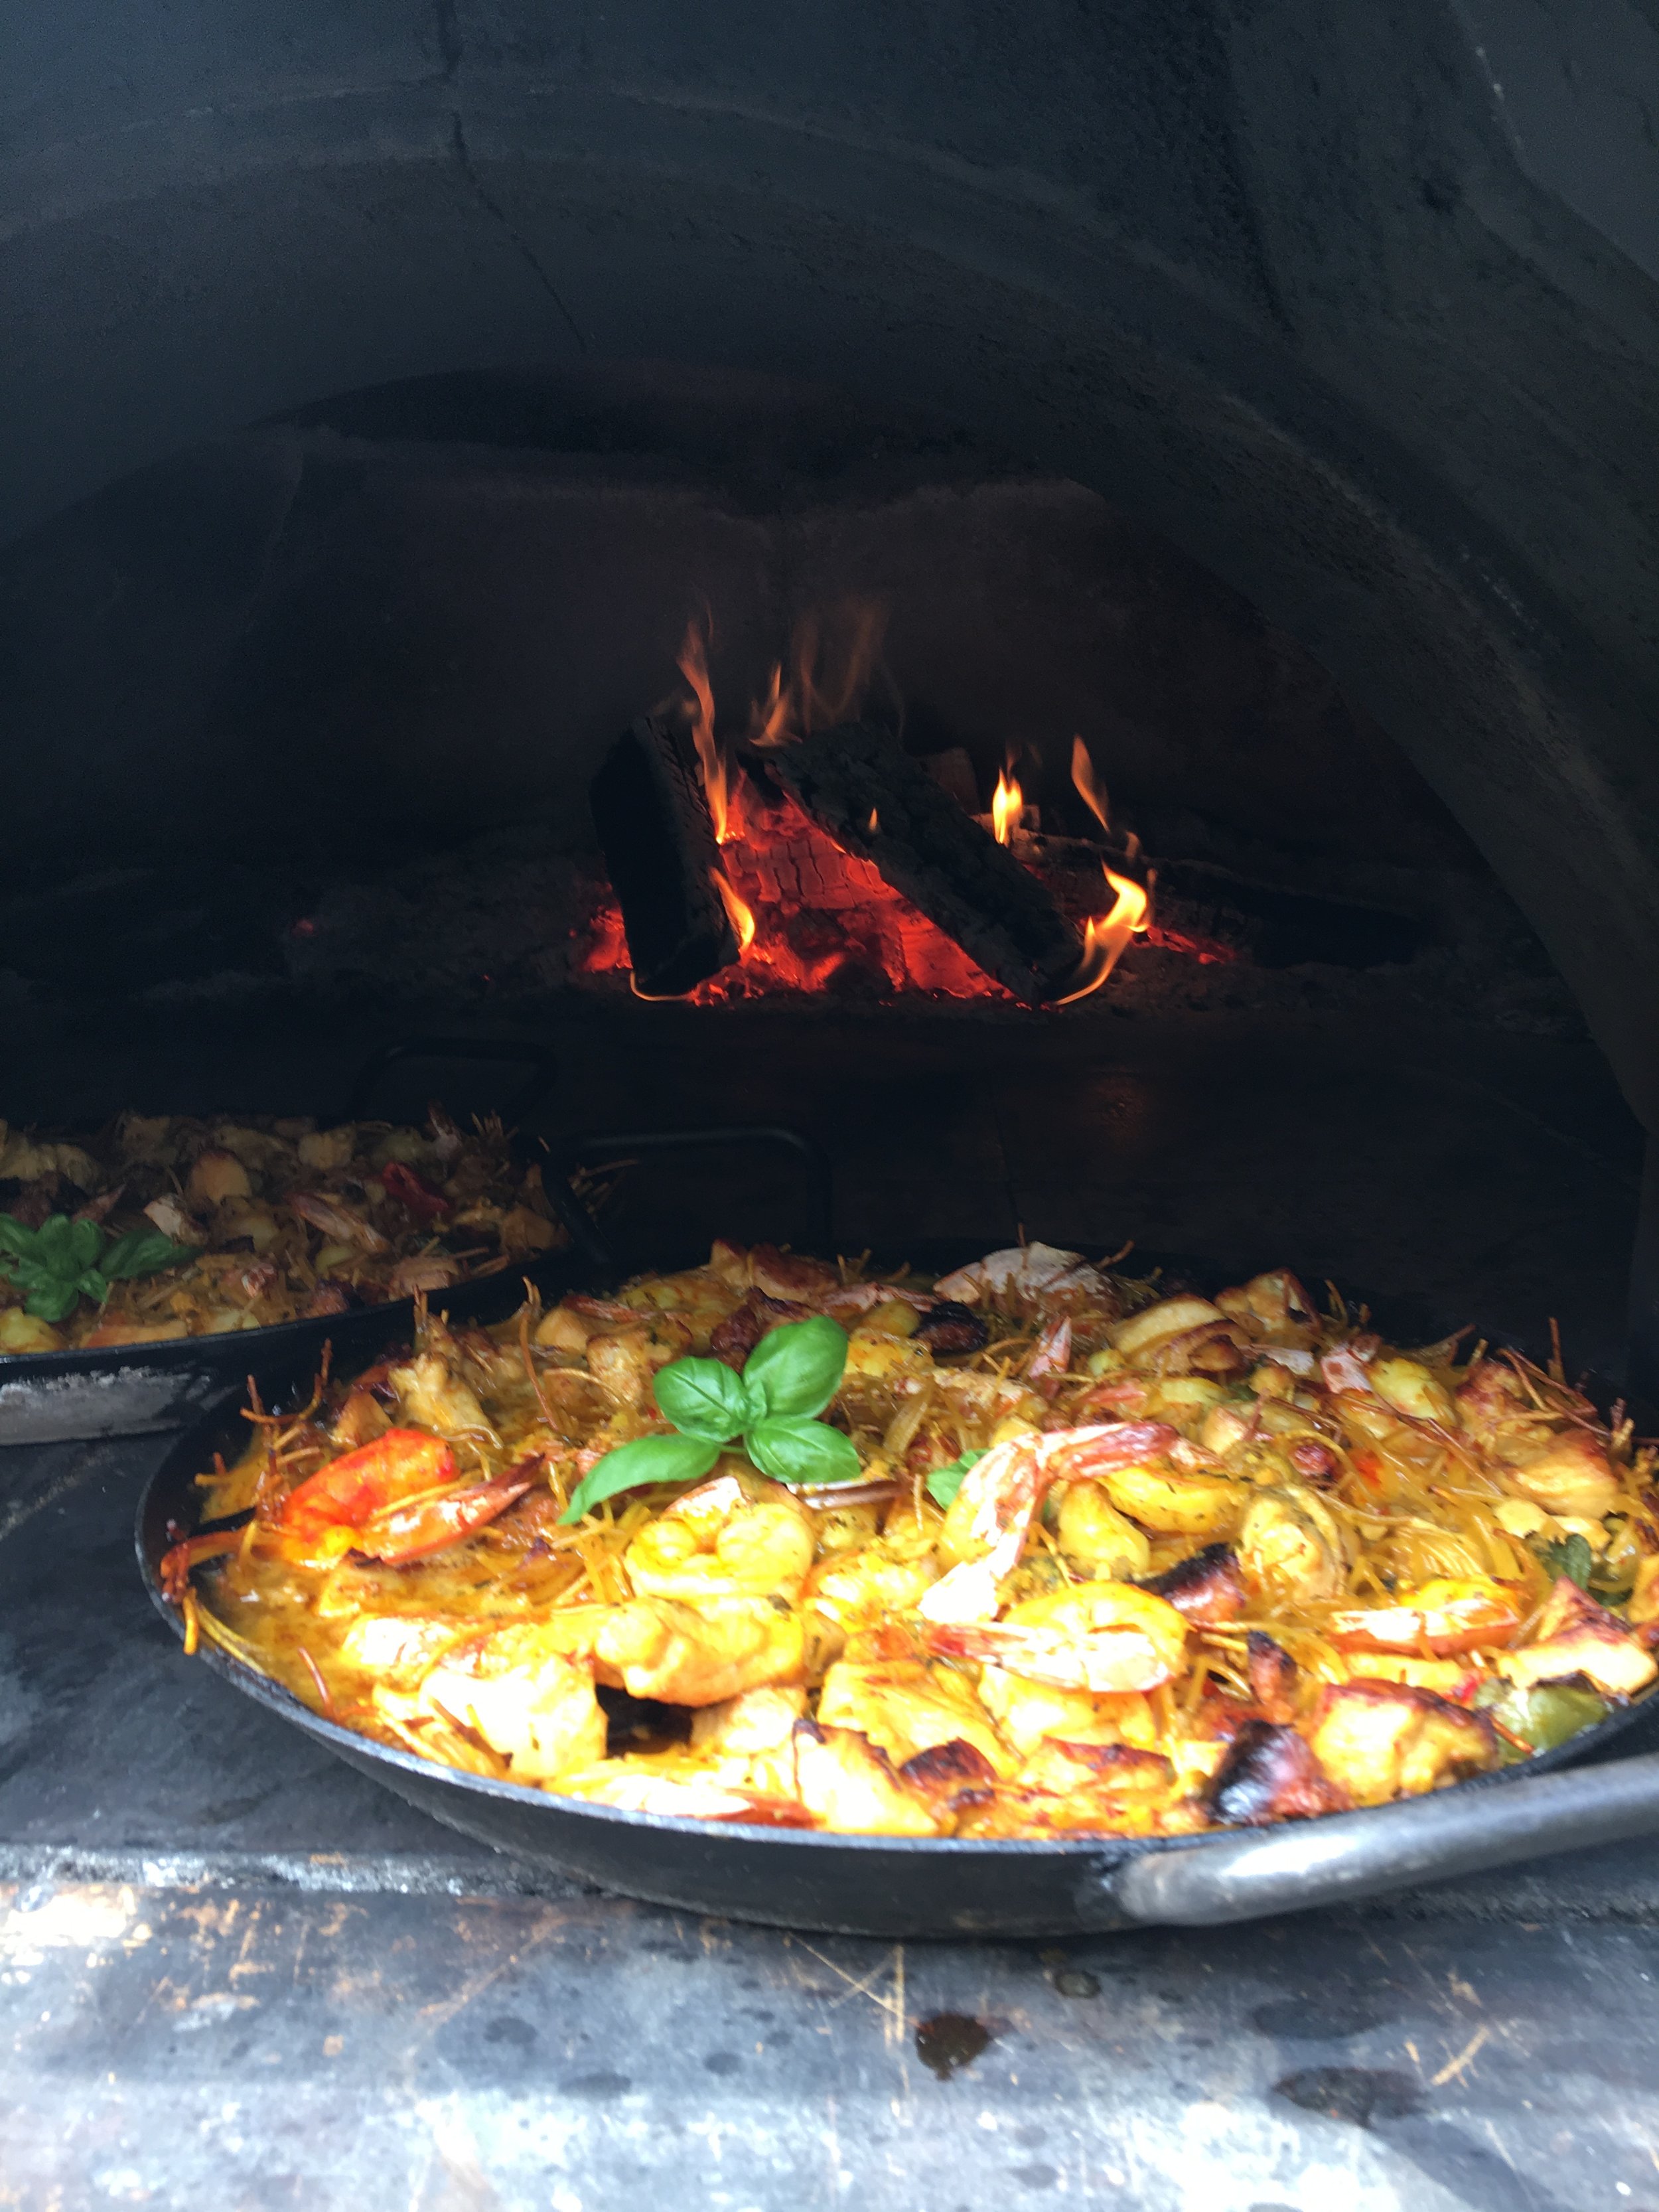 More various pans of food being cooked in a pizza oven